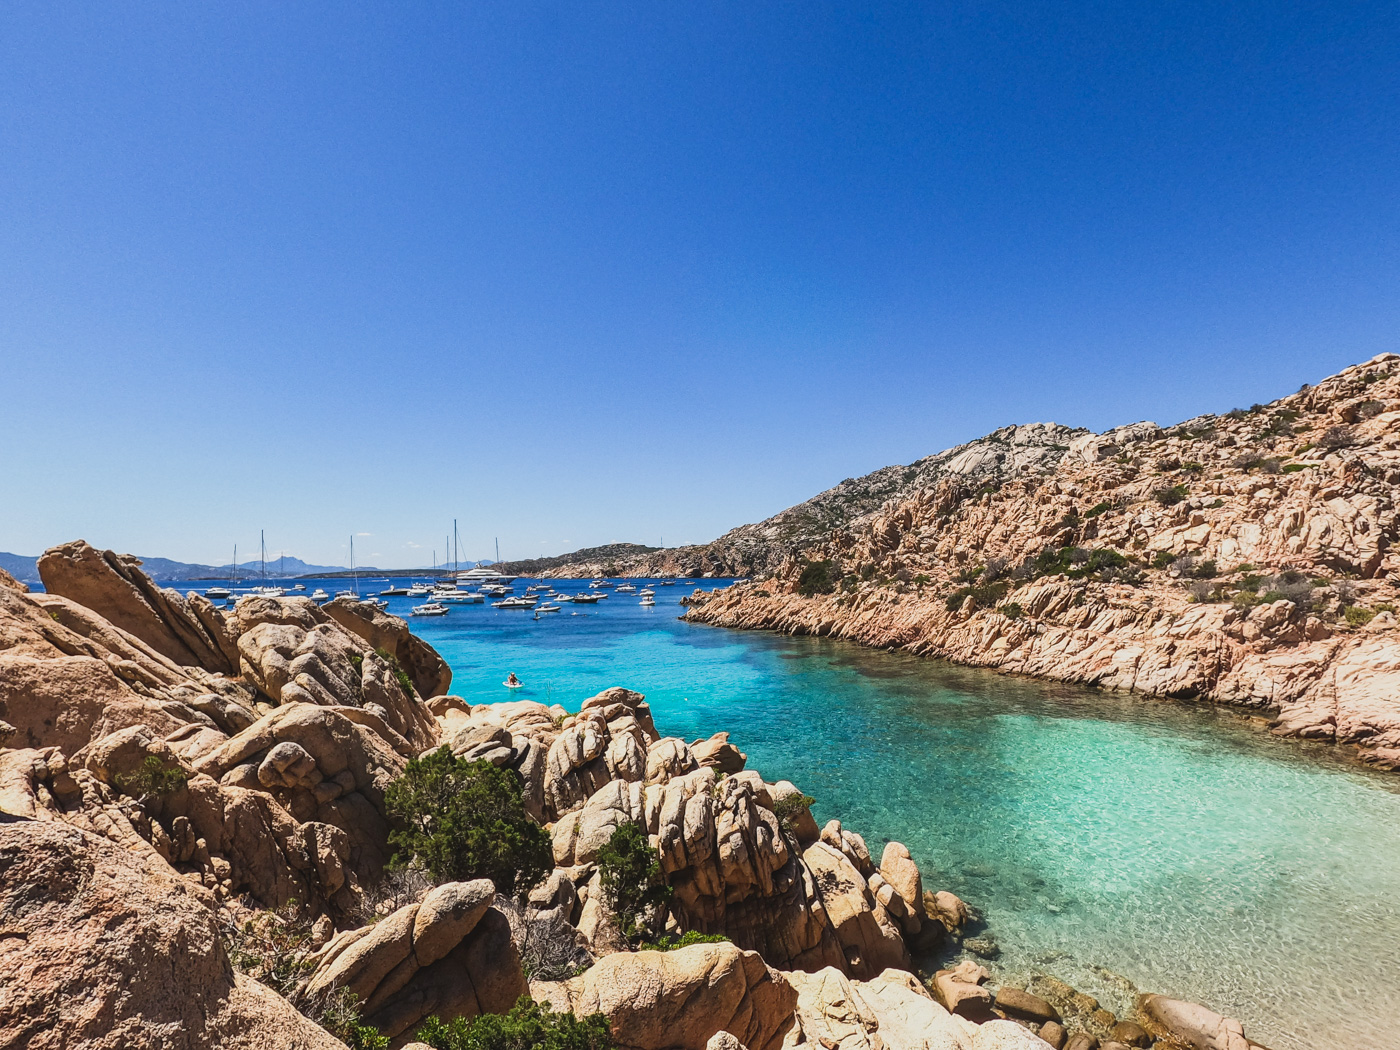 How to get to Cala Coticcio